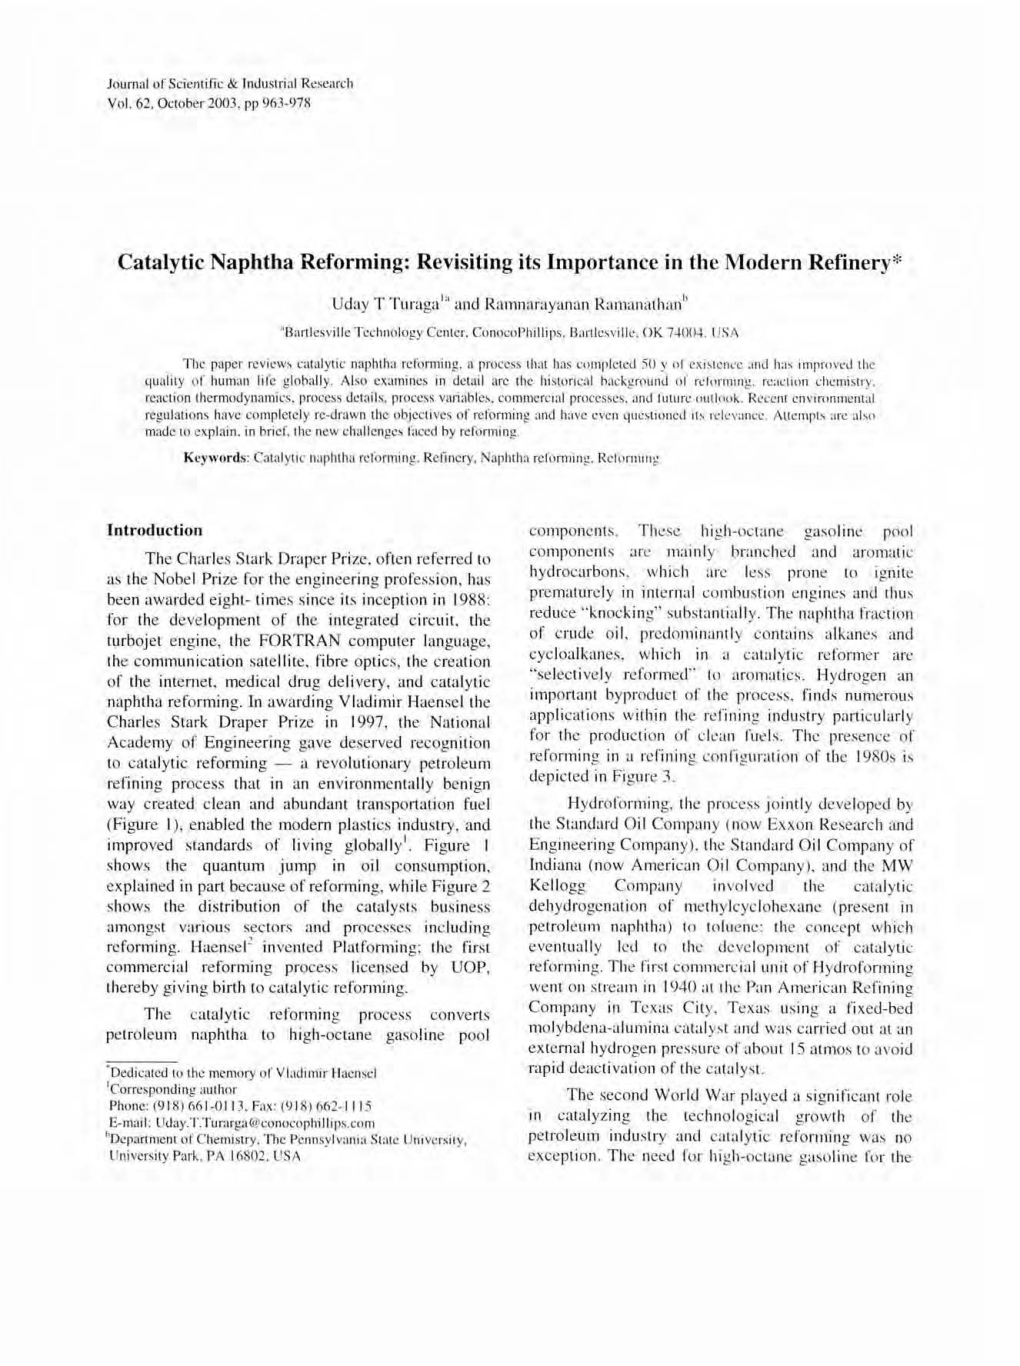 Catalytic Naphtha Reforming: Revisiting Its Importance in the Modern Refinery*